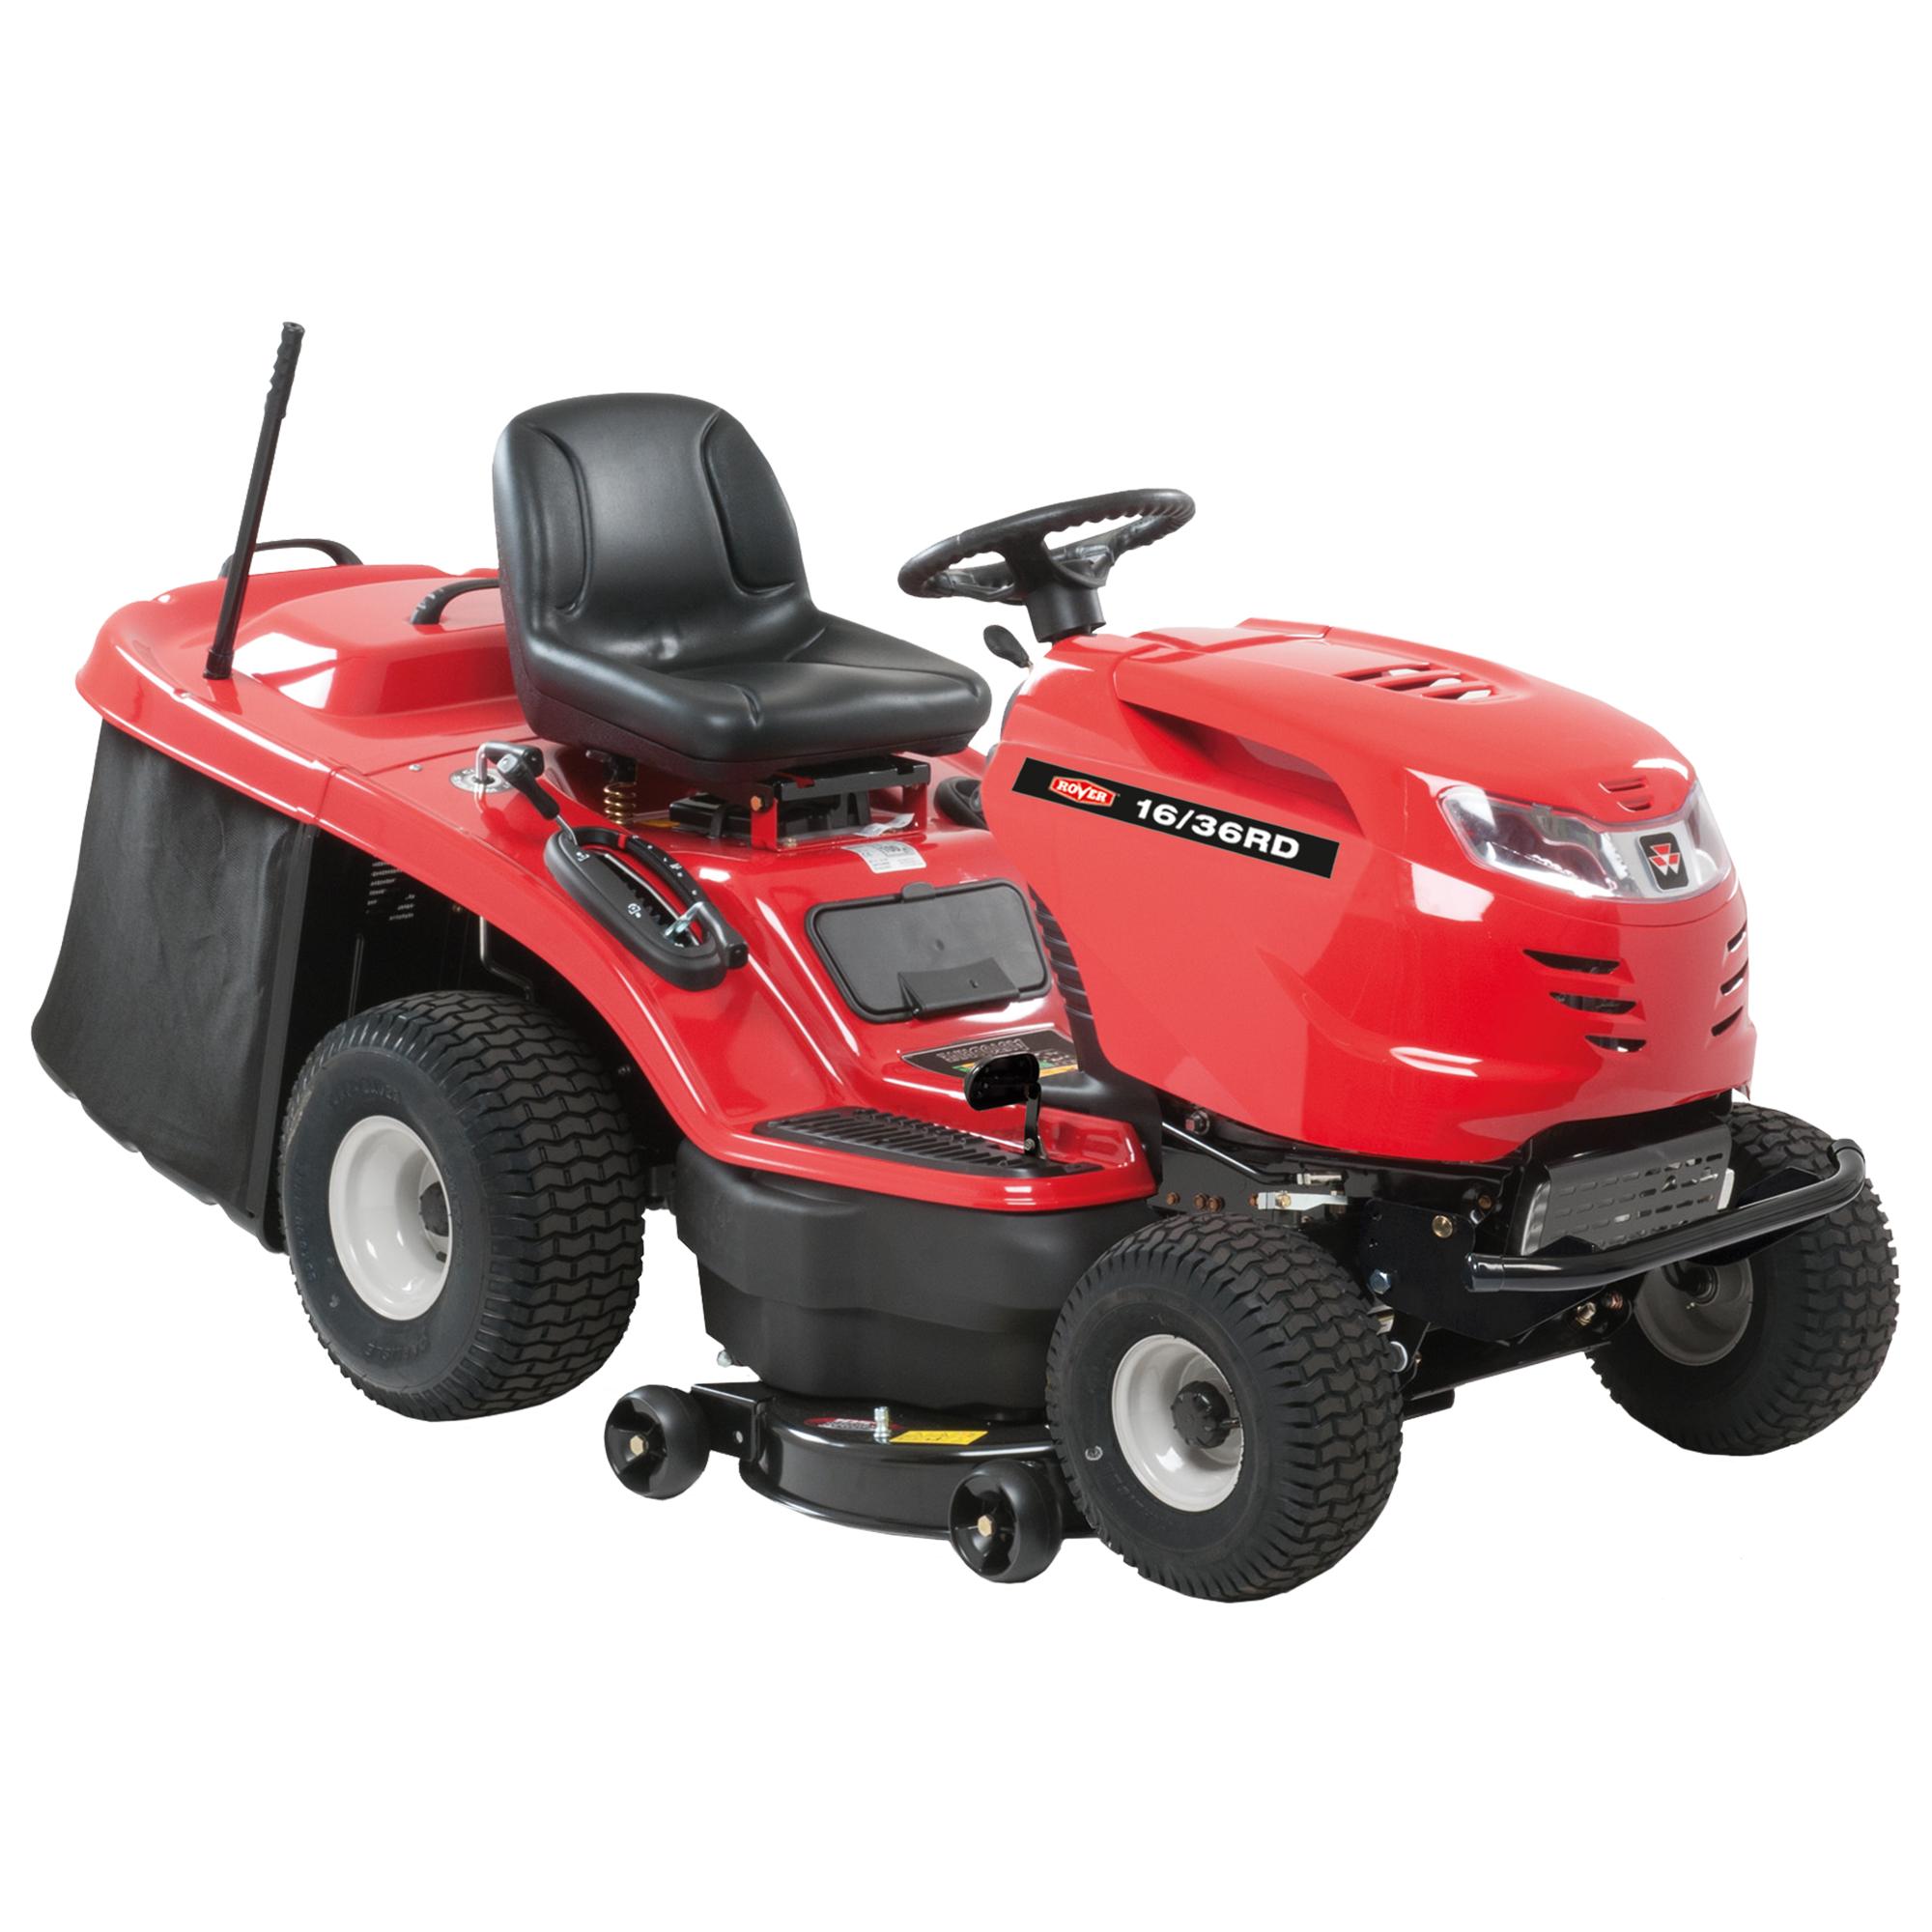 Rover Mowers Logo - Rover 16-36RD Ride On Mower [13HD90GE395] - $4,199.00 : Mighty ...